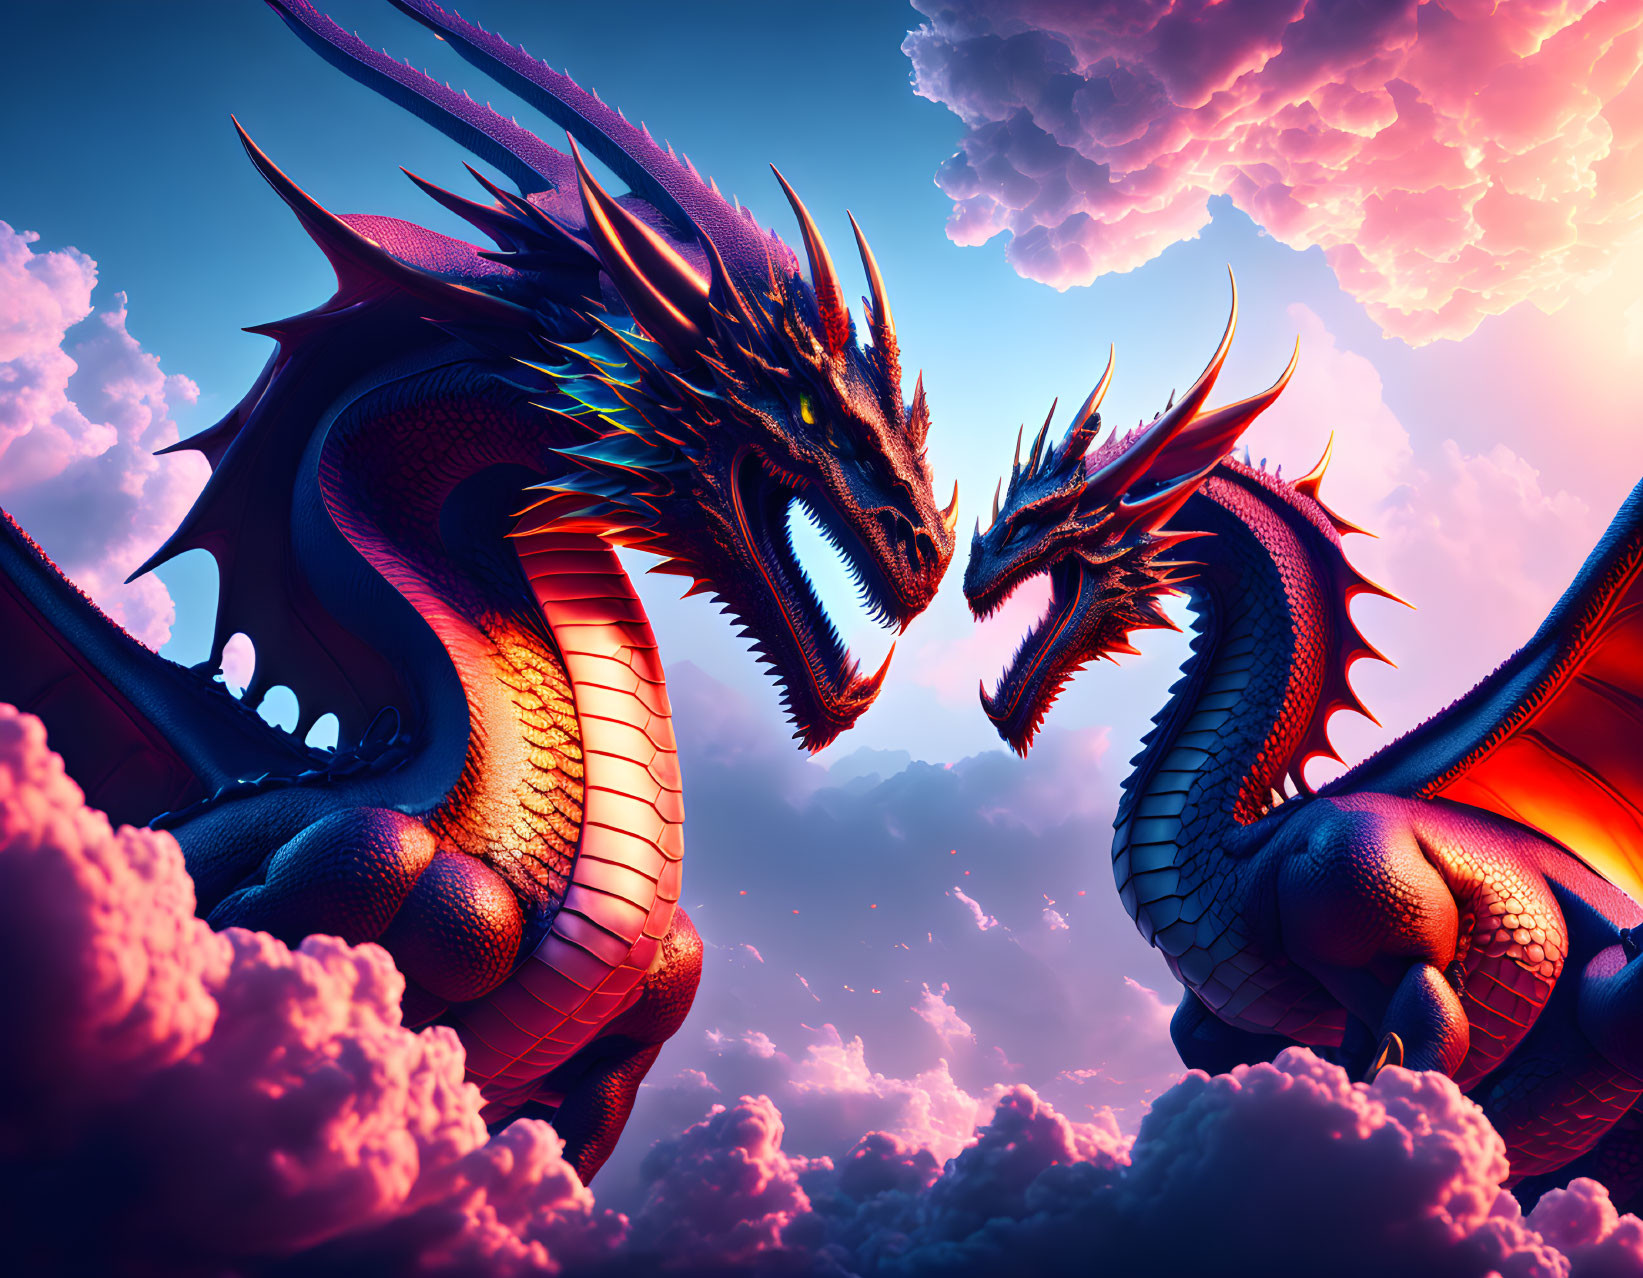 Majestic dragons in fantasy scene with pink clouds